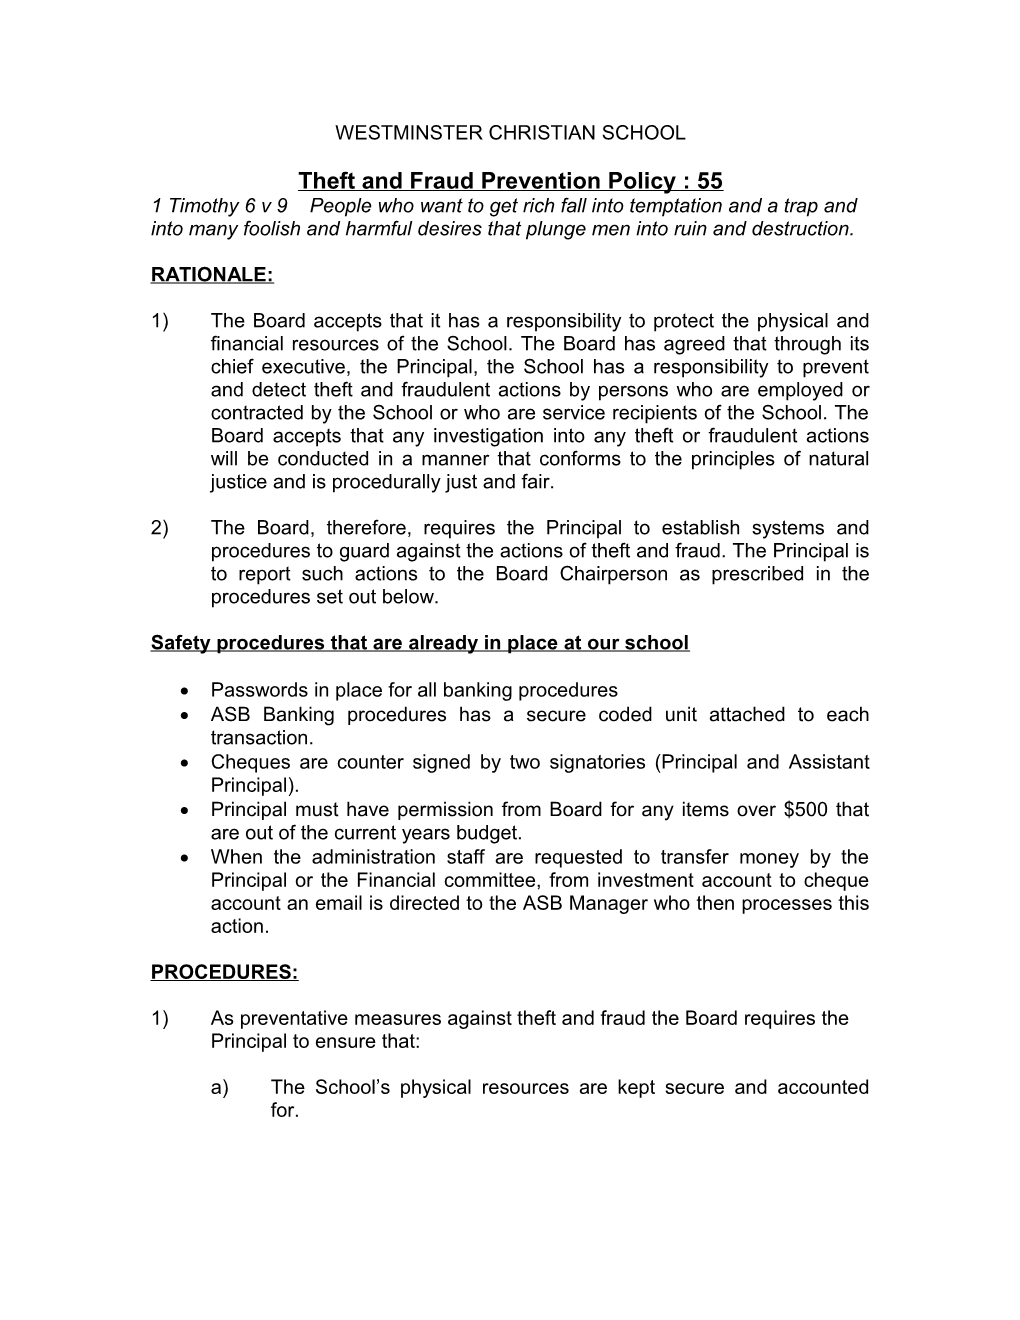 Theft and Fraud Prevention Policy : 55